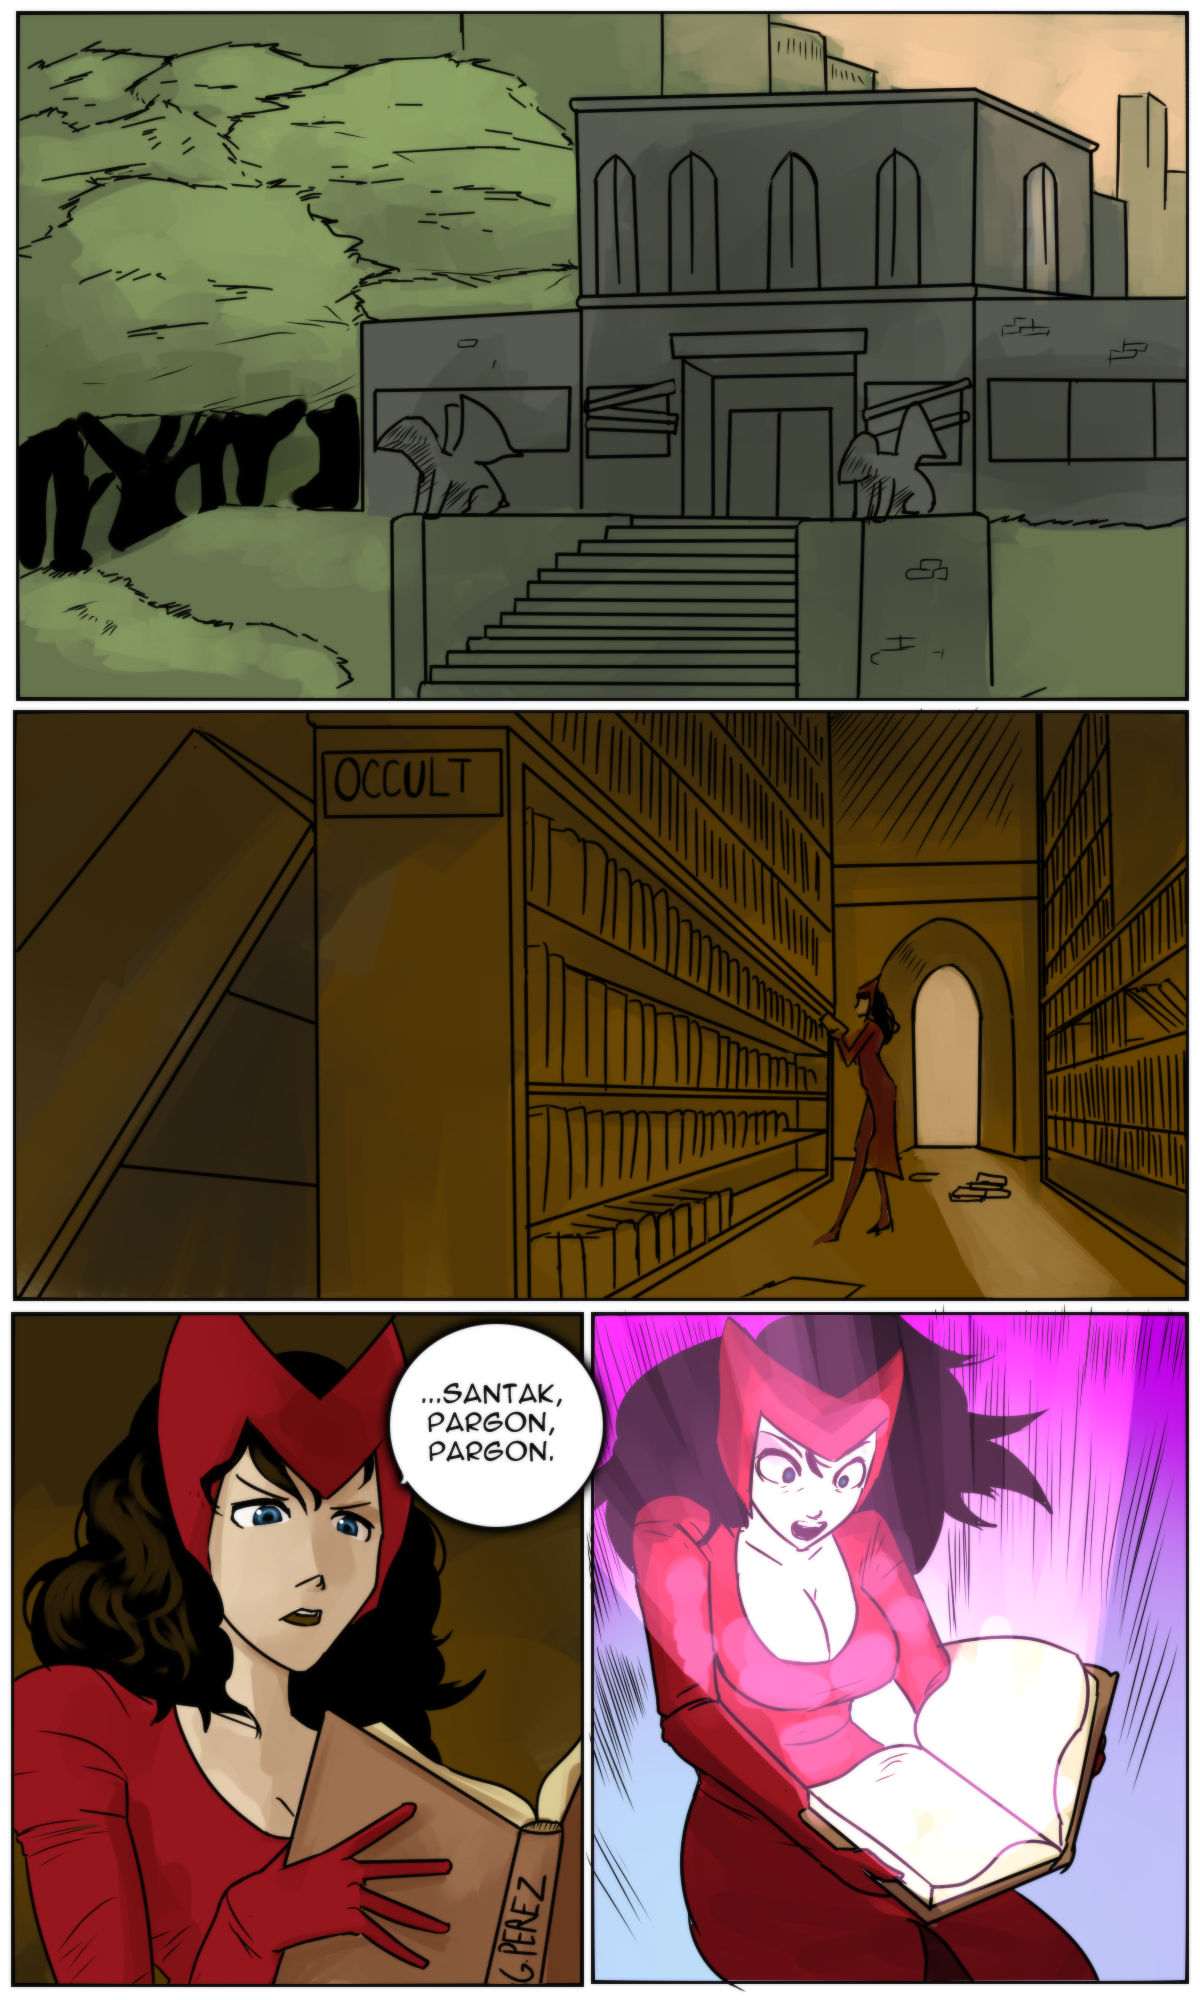 Curse-of-the-Succubus-page01--Gotofap.tk--46368762.png